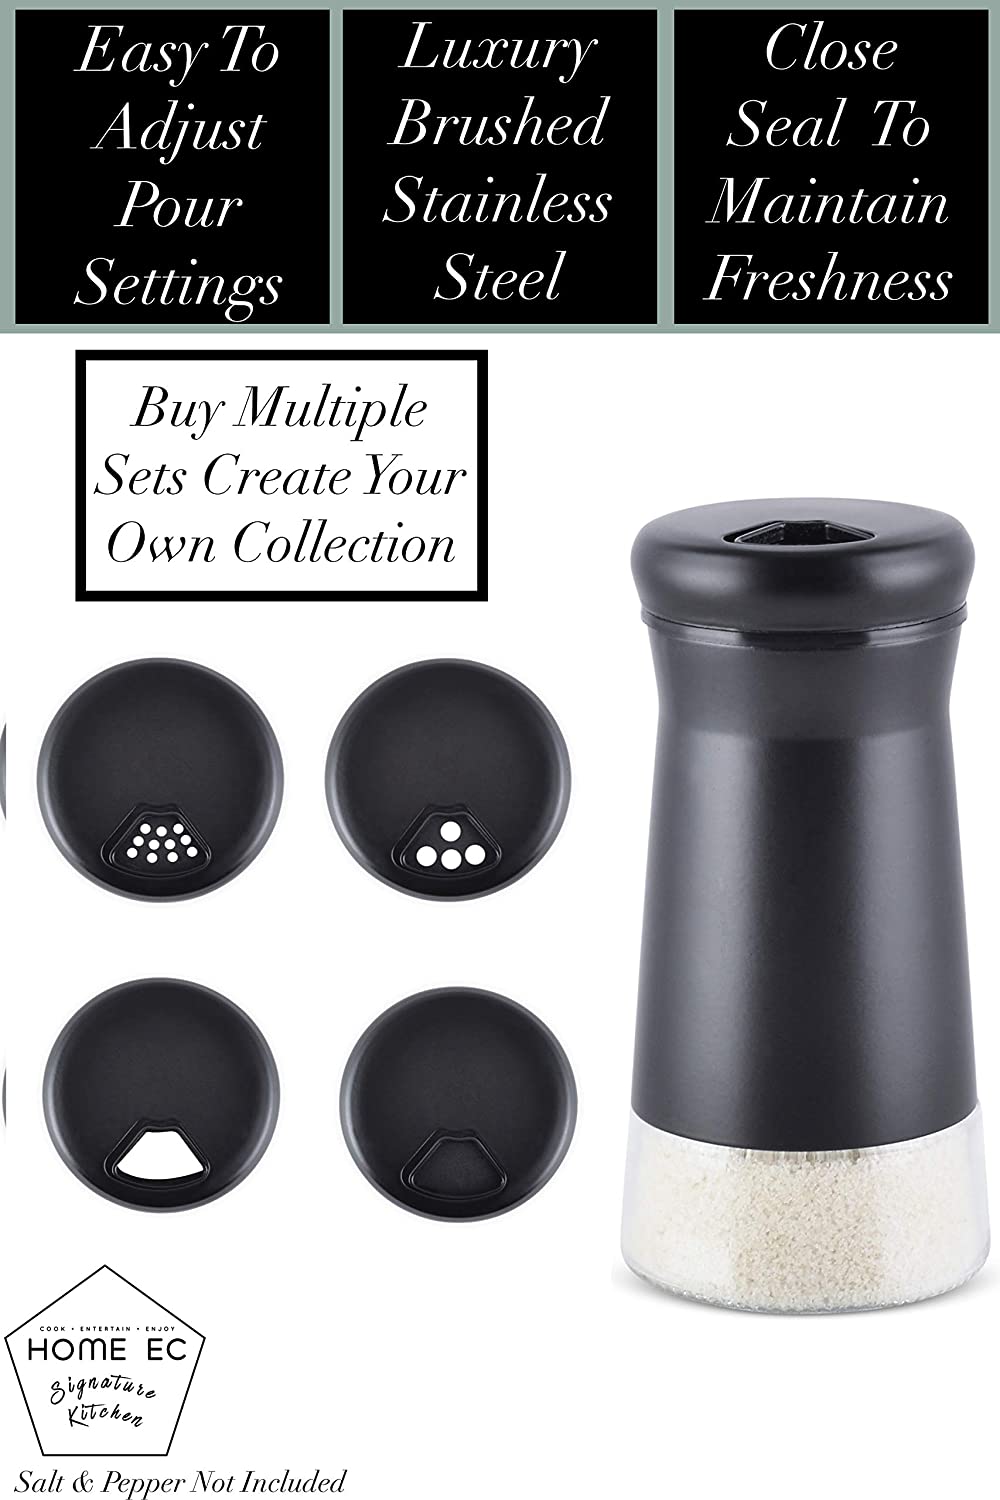 Manual Pepper Grinder or Salt Shaker for Professional Chef - Best Spice Mill with Brushed Stainless Steel - Stainless Steel Short, Silver